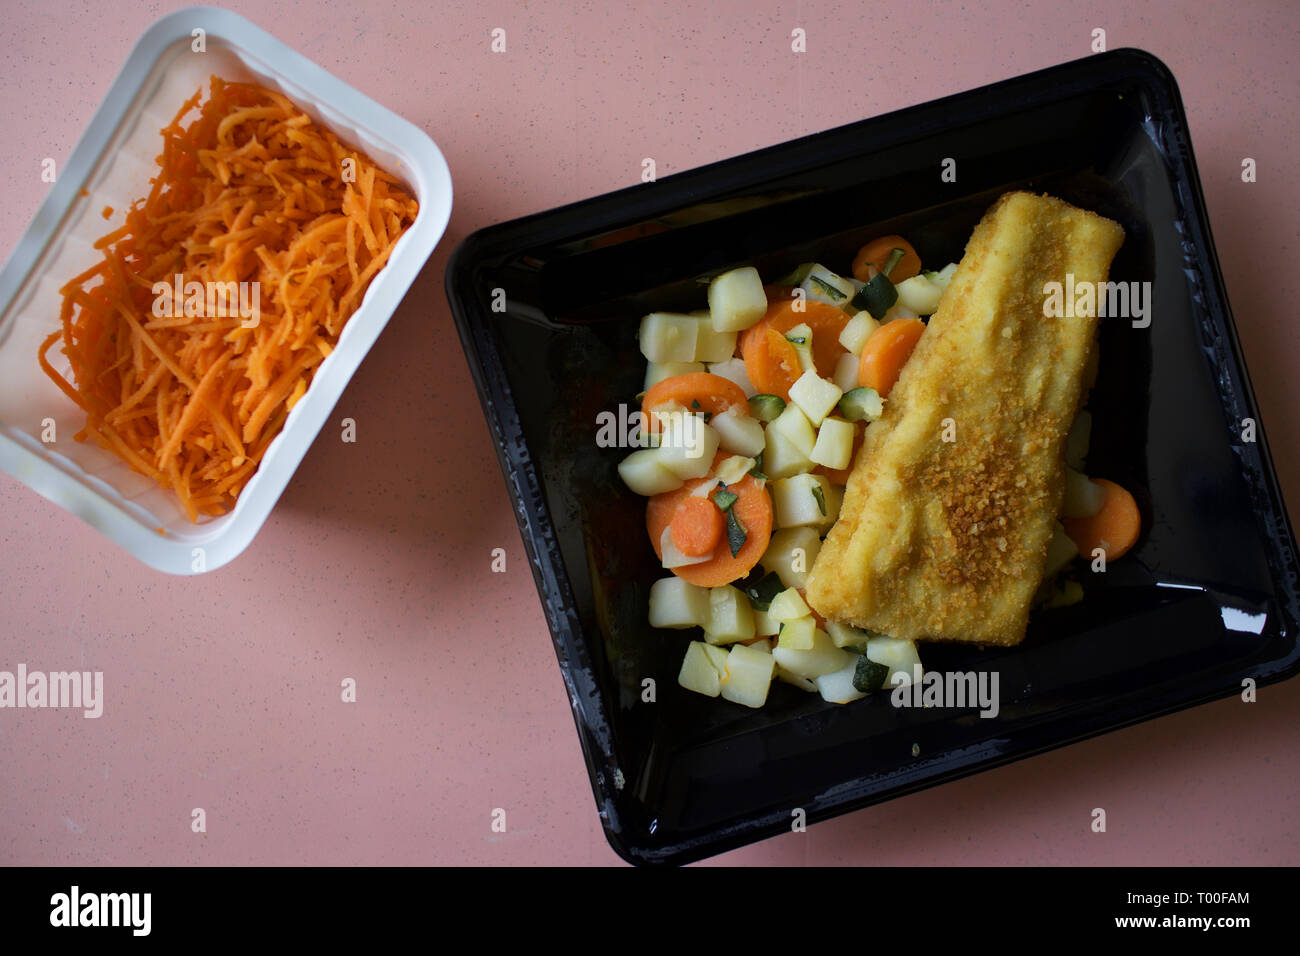 Convenience food in plastic packaging - ready to eat Stock Photo